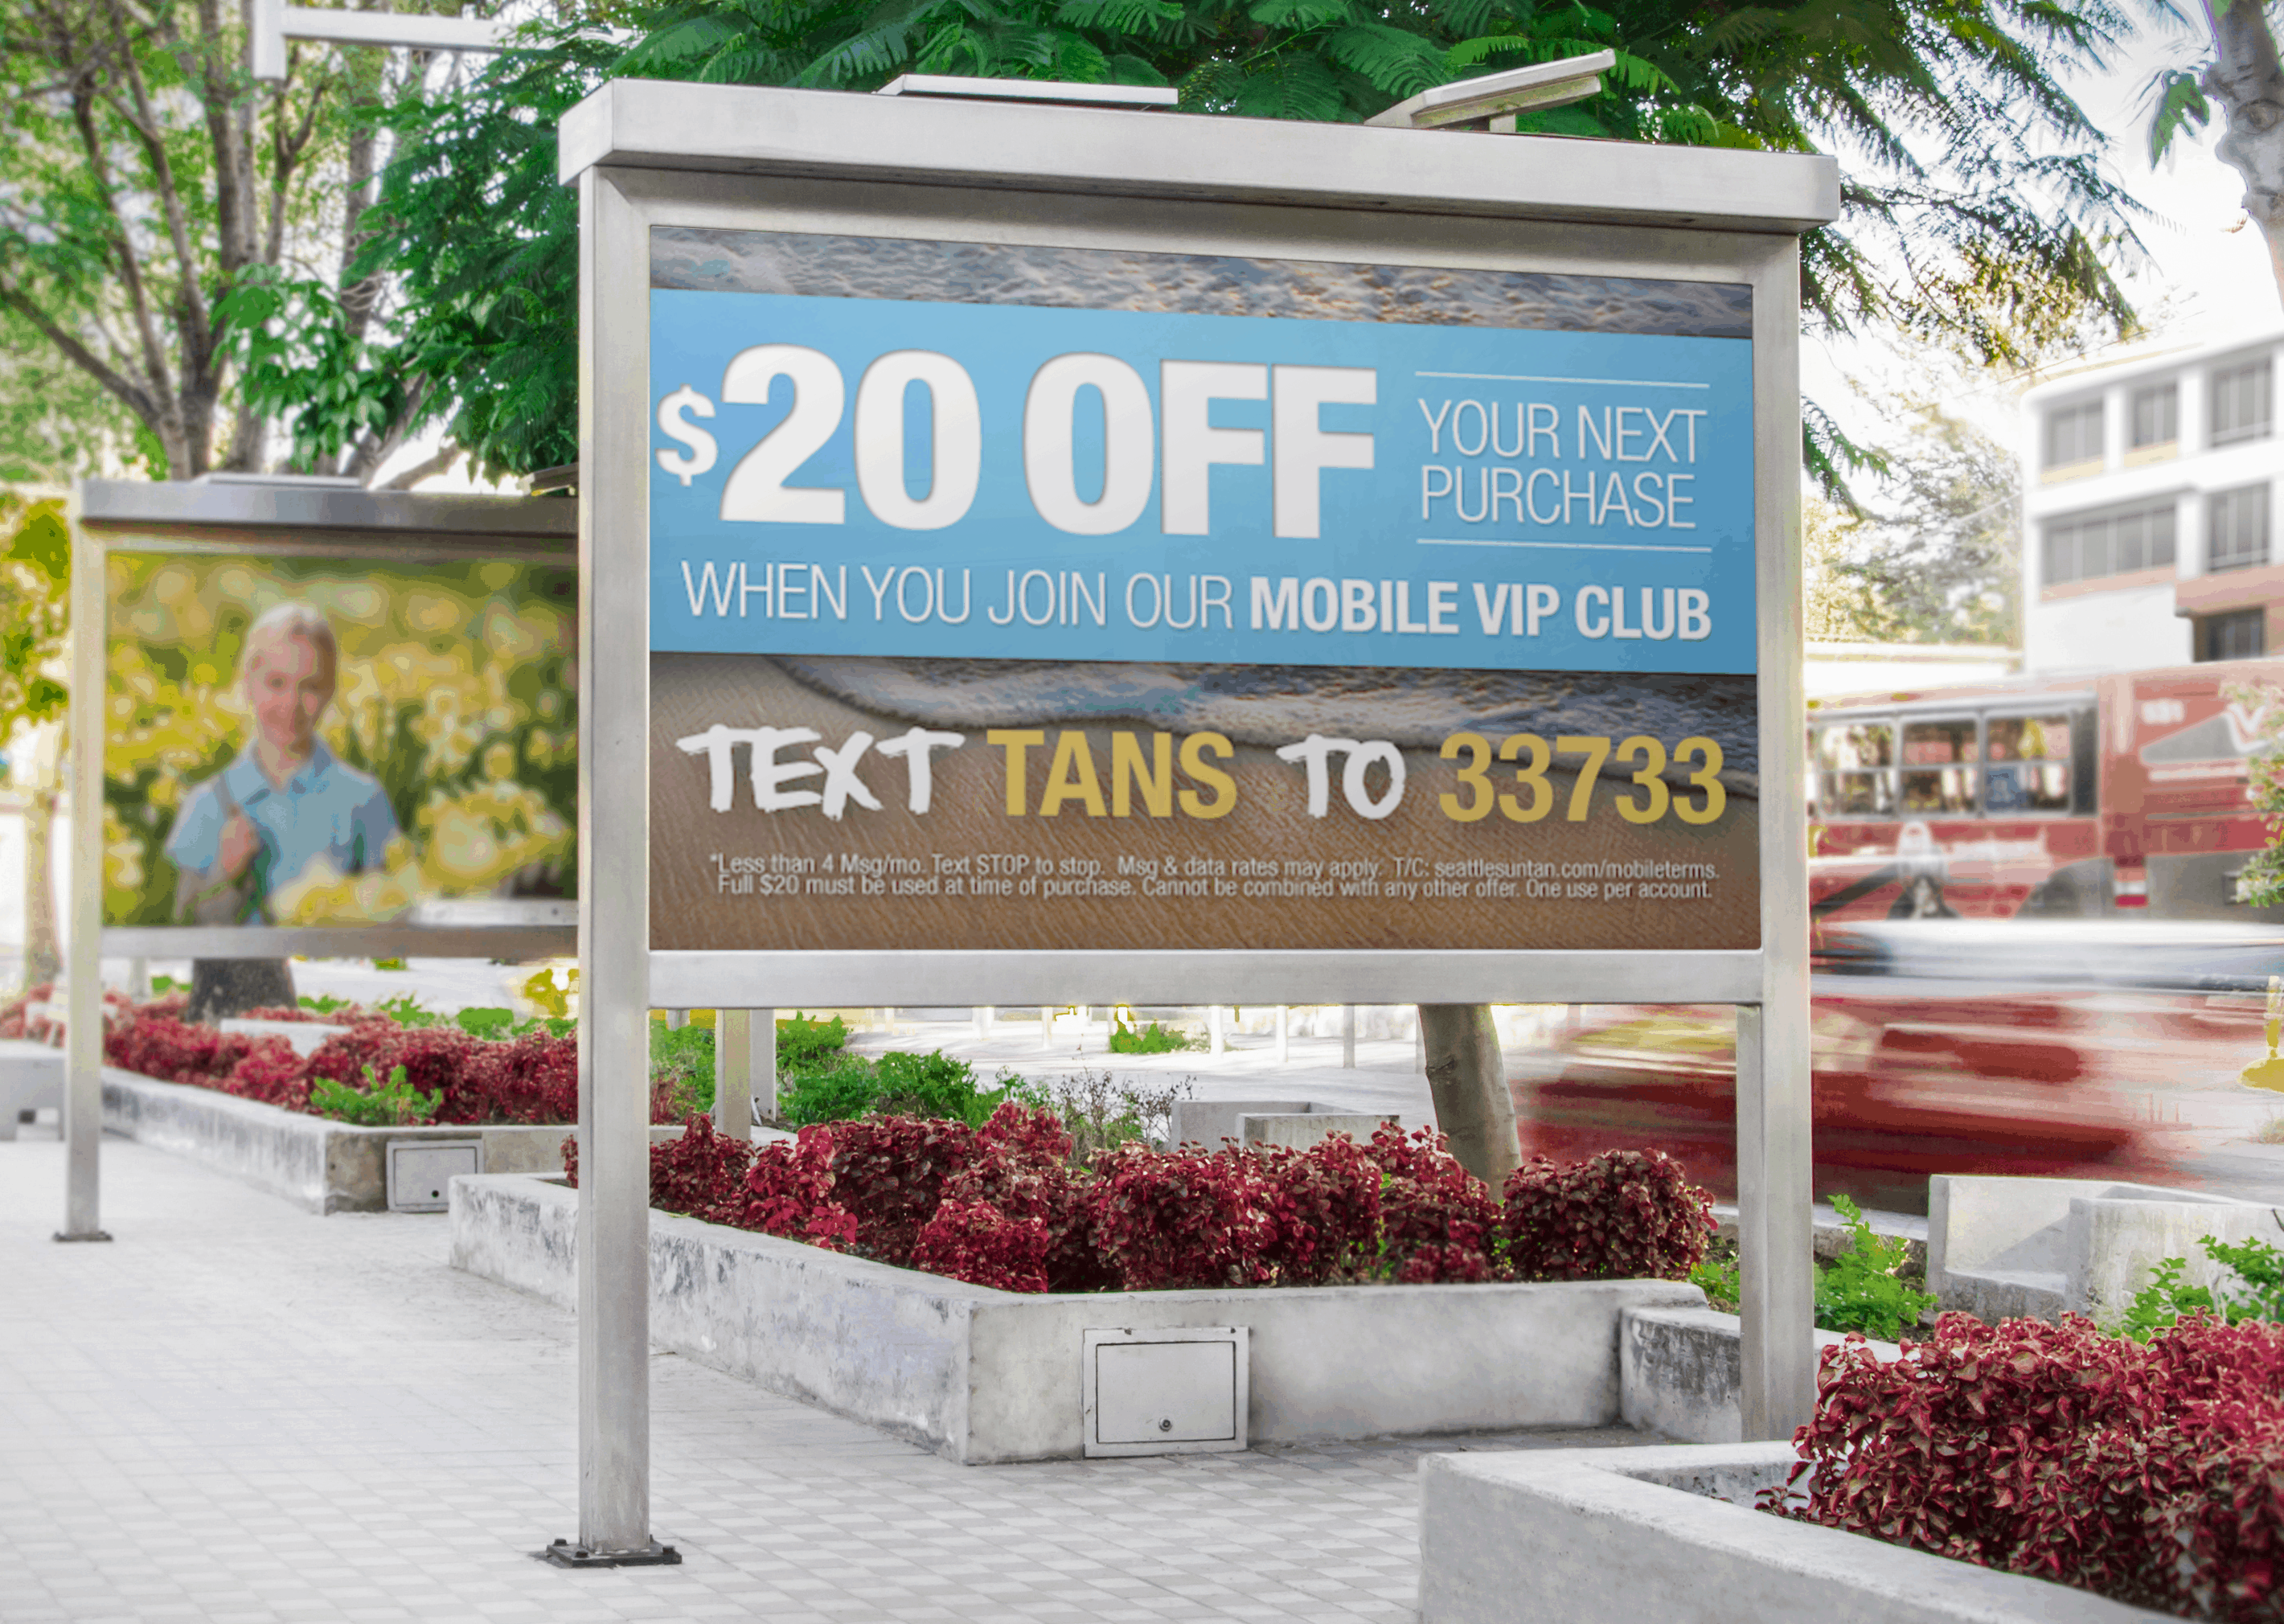 SMS Marketing Advertising Example from Tanning Salon